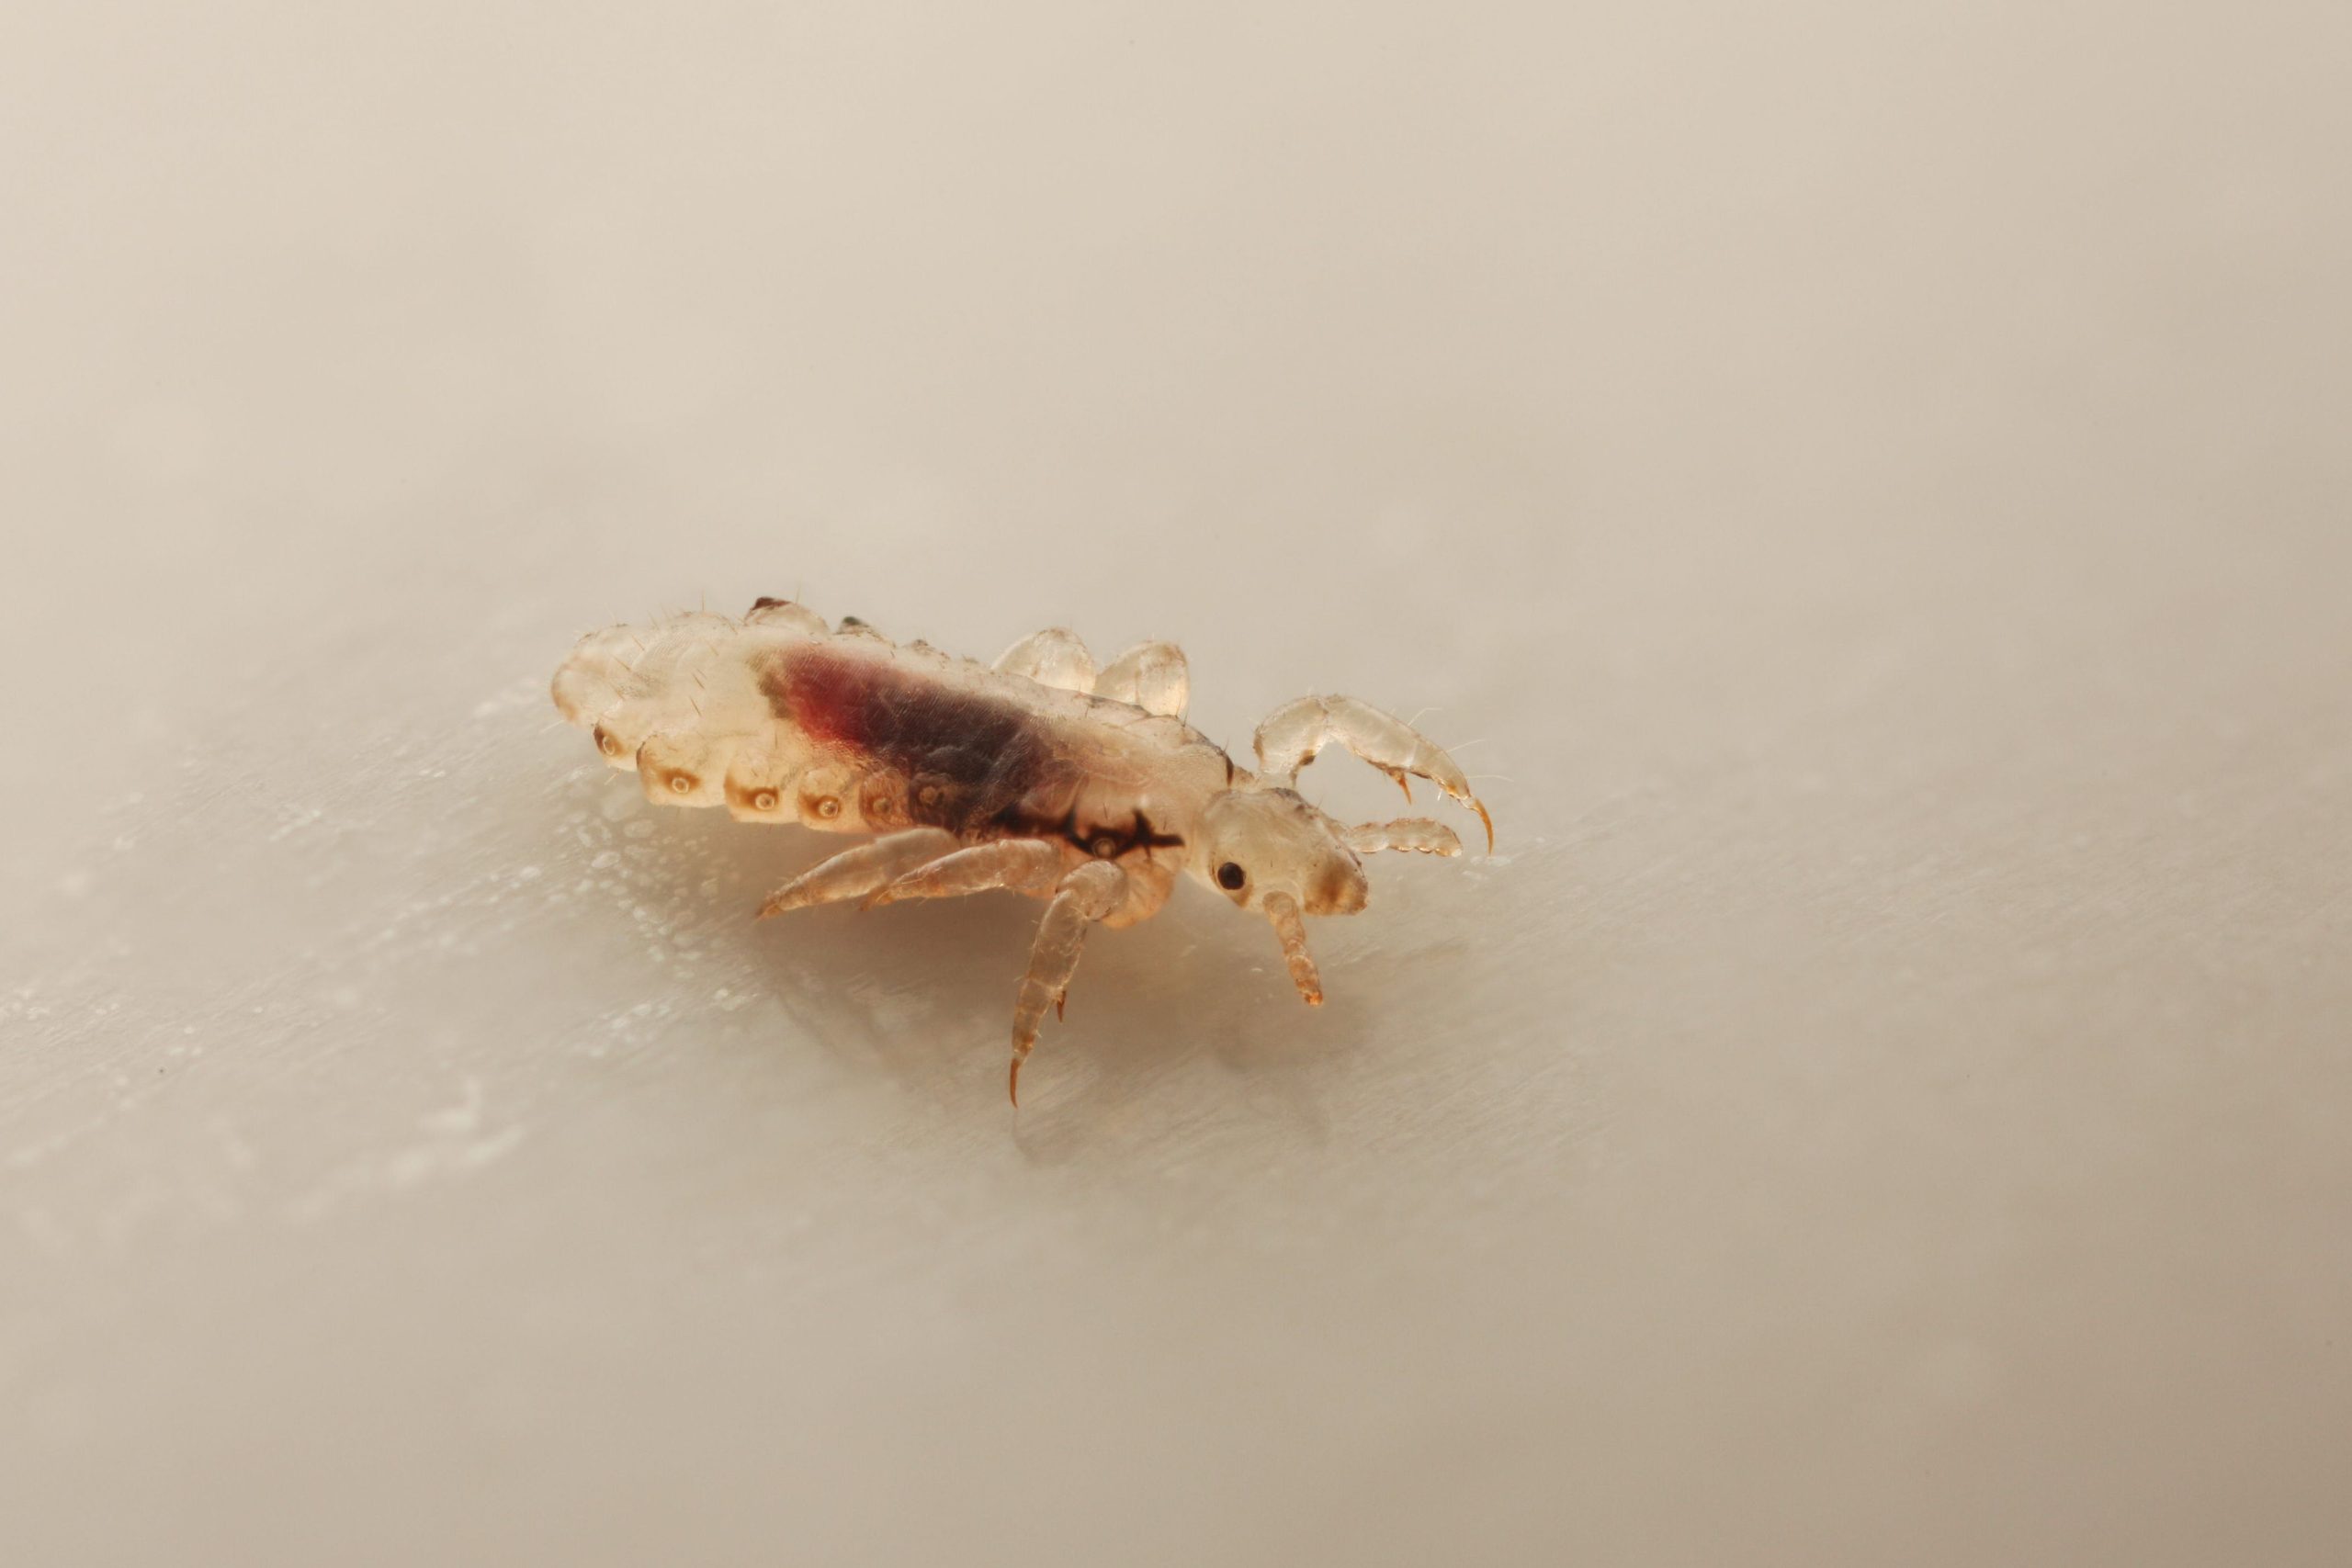 Lice Removal Service: Why You Should Use a Removal Service?